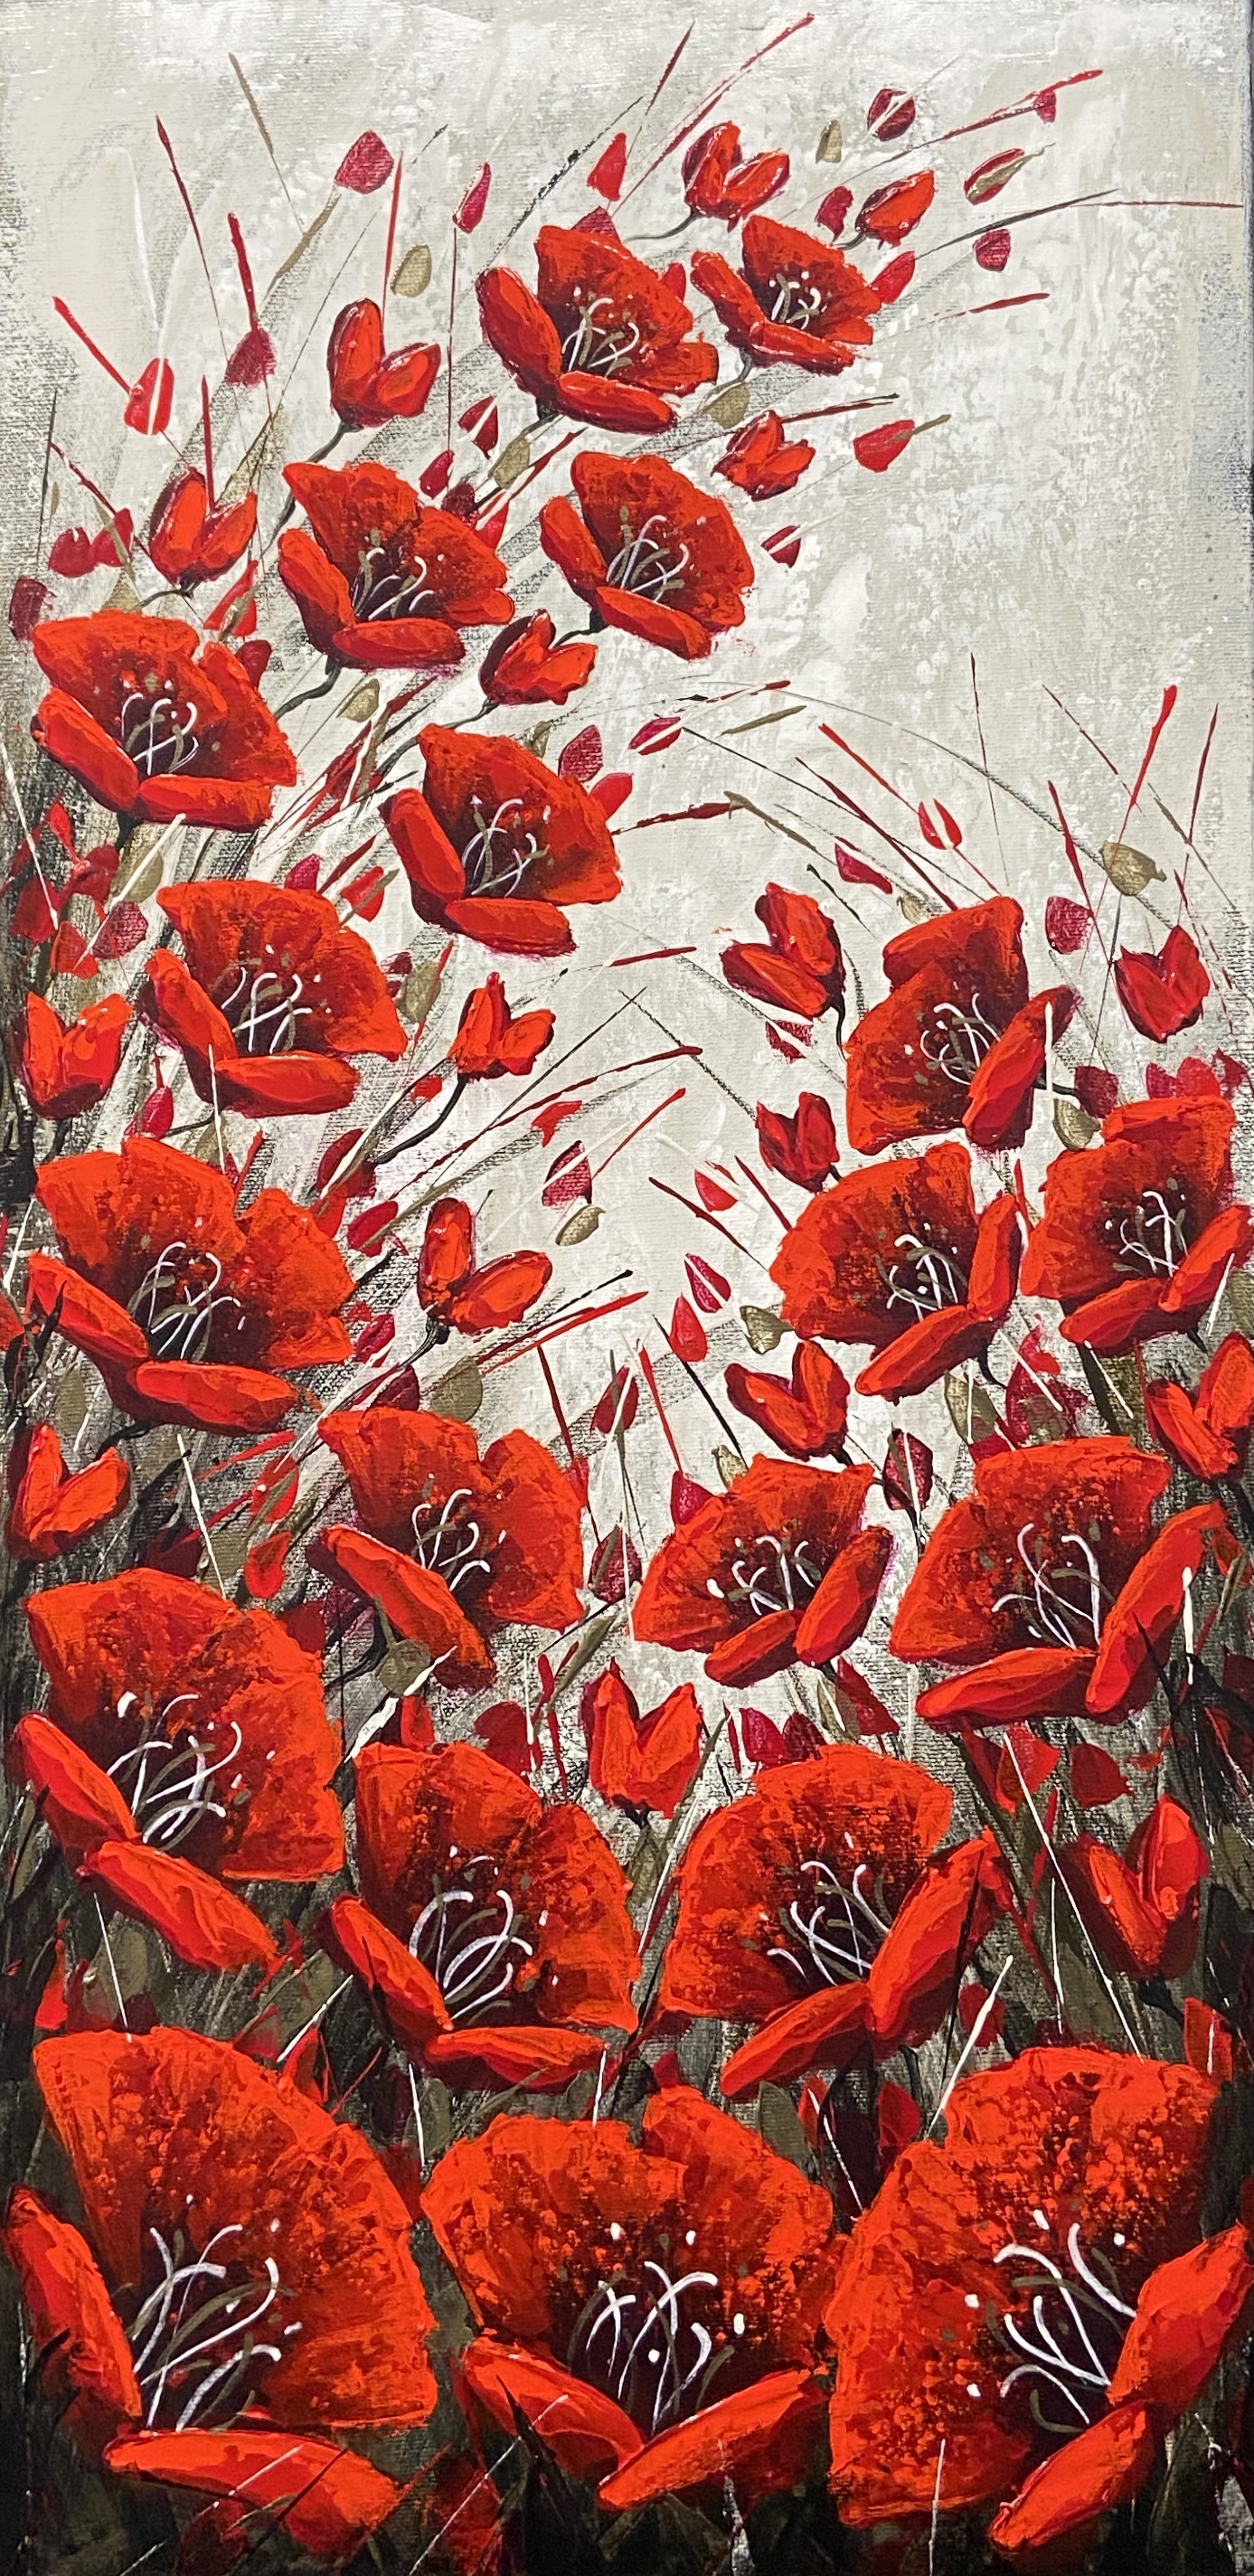 Sweet Moments – winter poppies 12×24